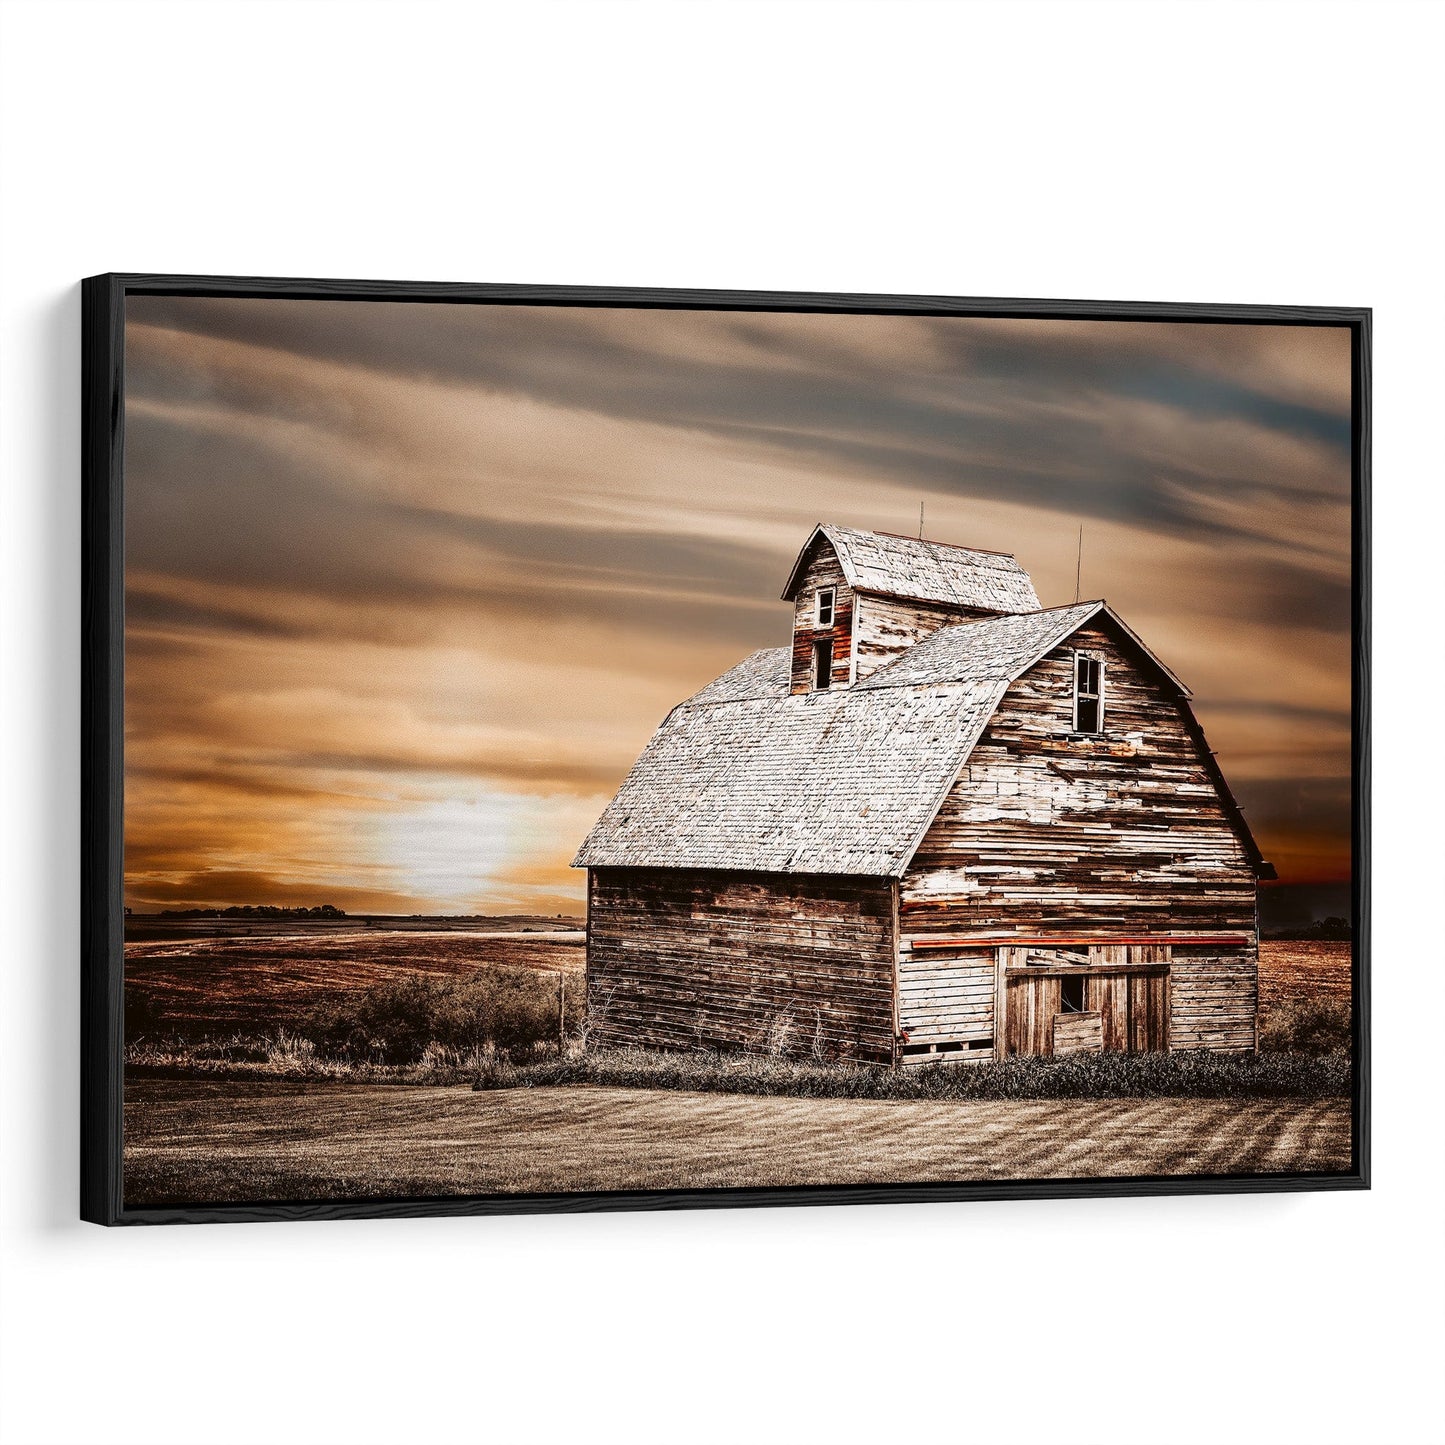 Rustic Old Barn and Sunset Photo Canvas-Black Frame / 12 x 18 Inches Wall Art Teri James Photography